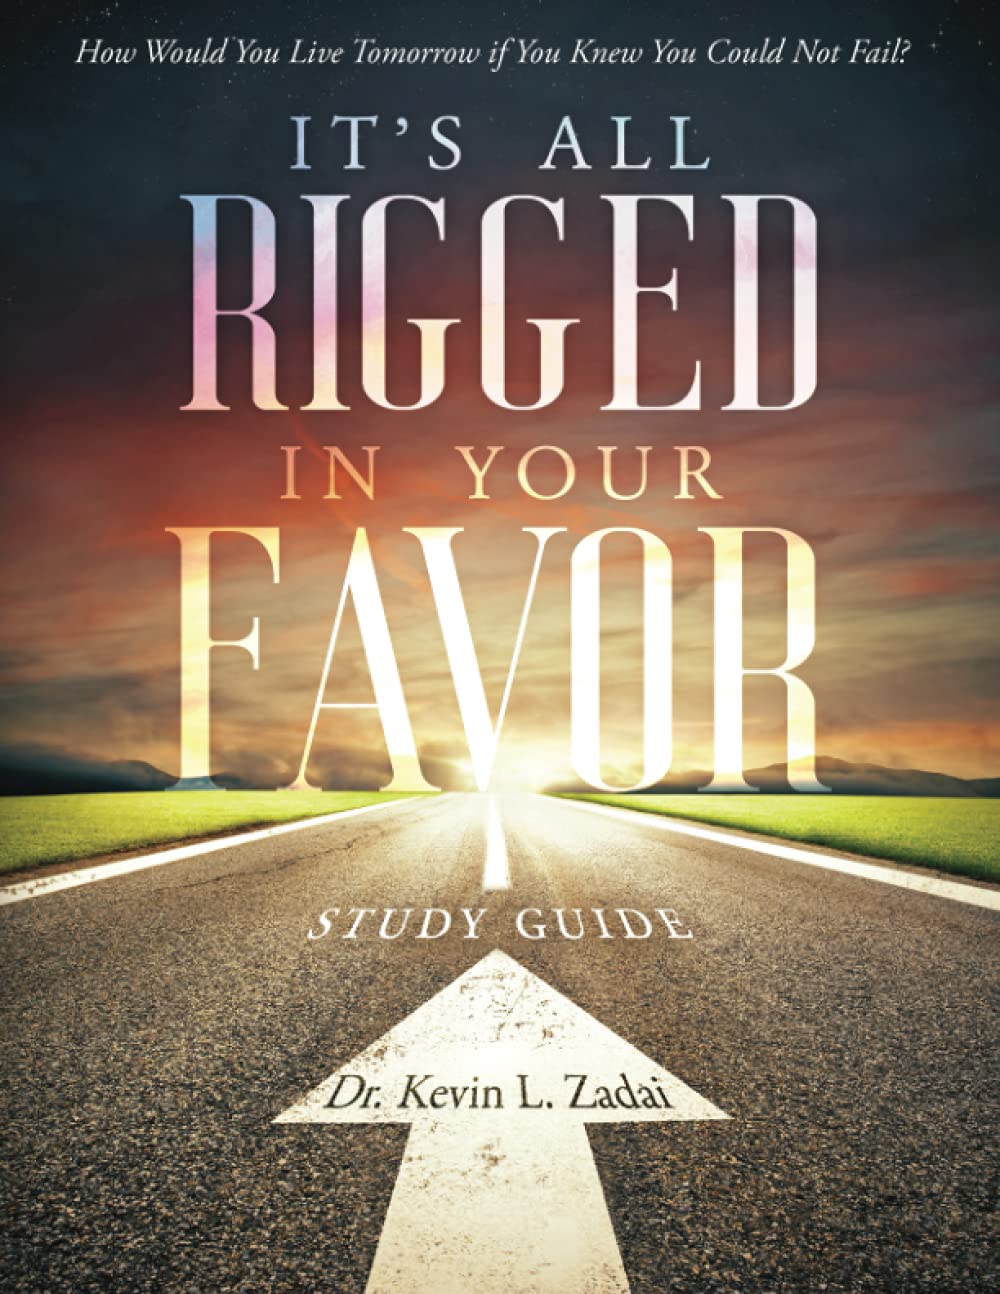 It's All Rigged In Your Favor - Study Guide